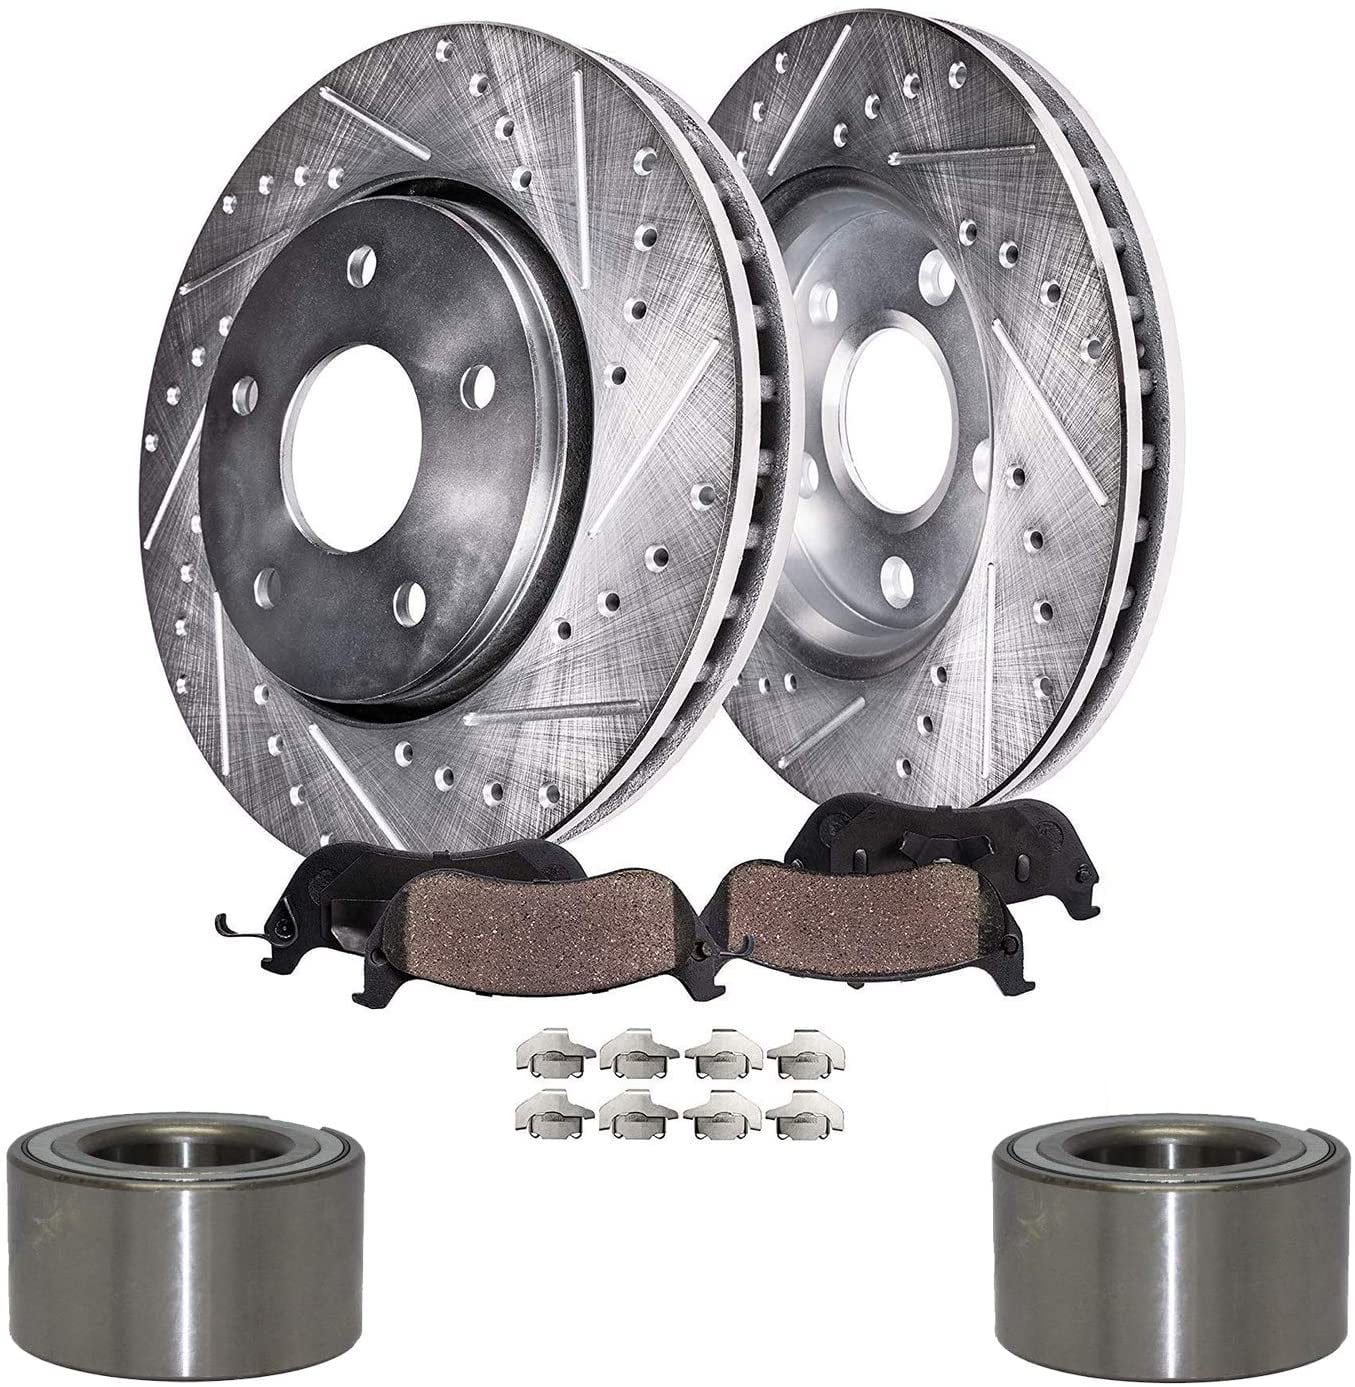 Front Discs Brake Rotors Ceramic Pads For 2007-2015 Lincoln MKX Drilled Slotted